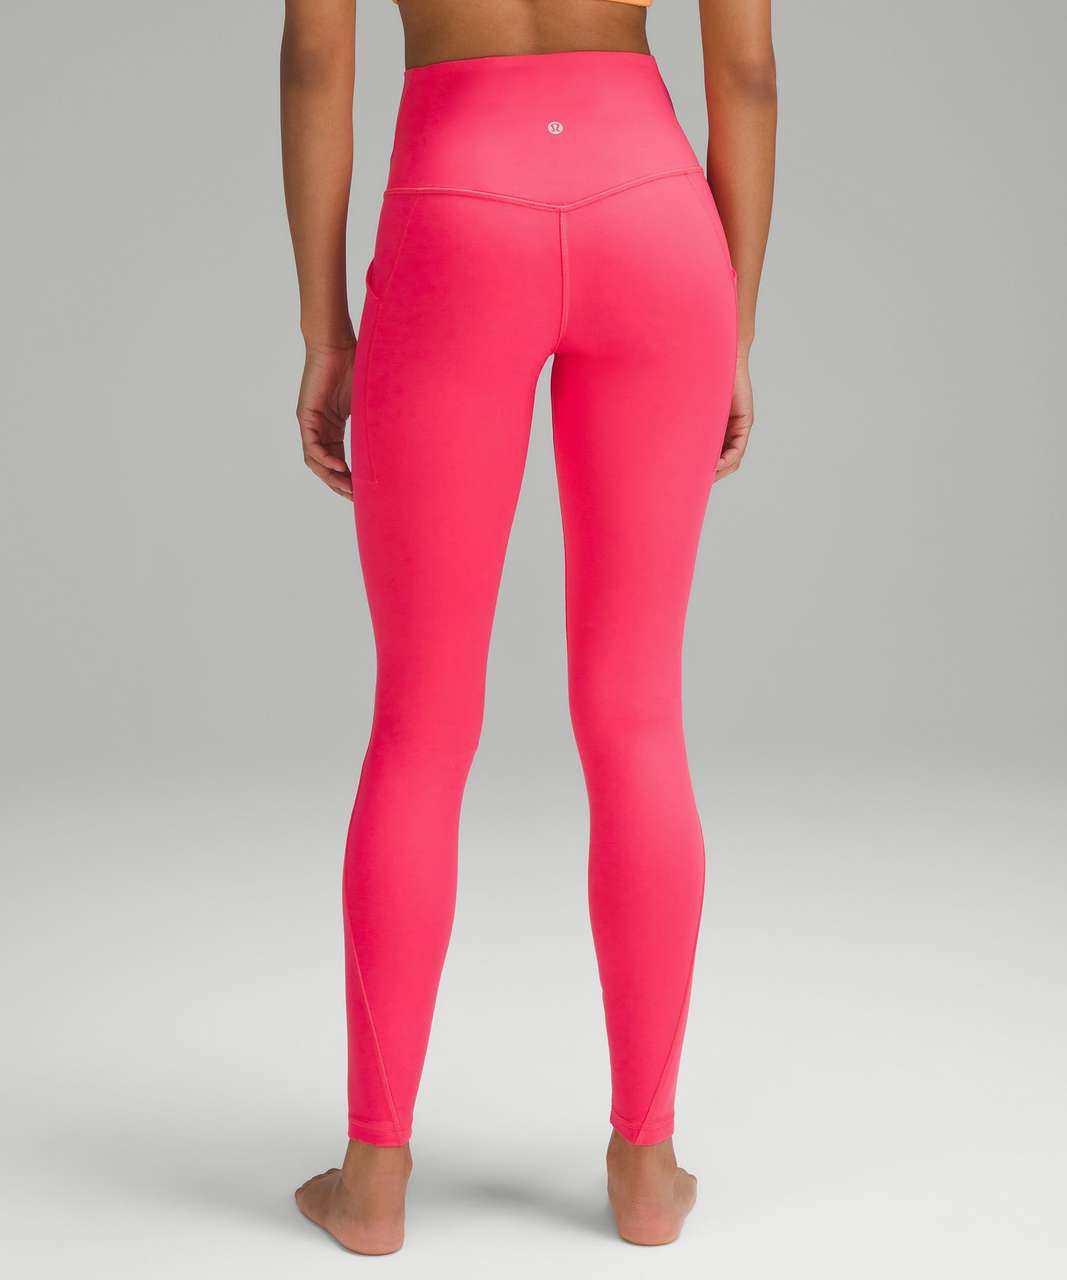 Lululemon Align High-Rise Pant with Pockets 25 - Sonic Pink